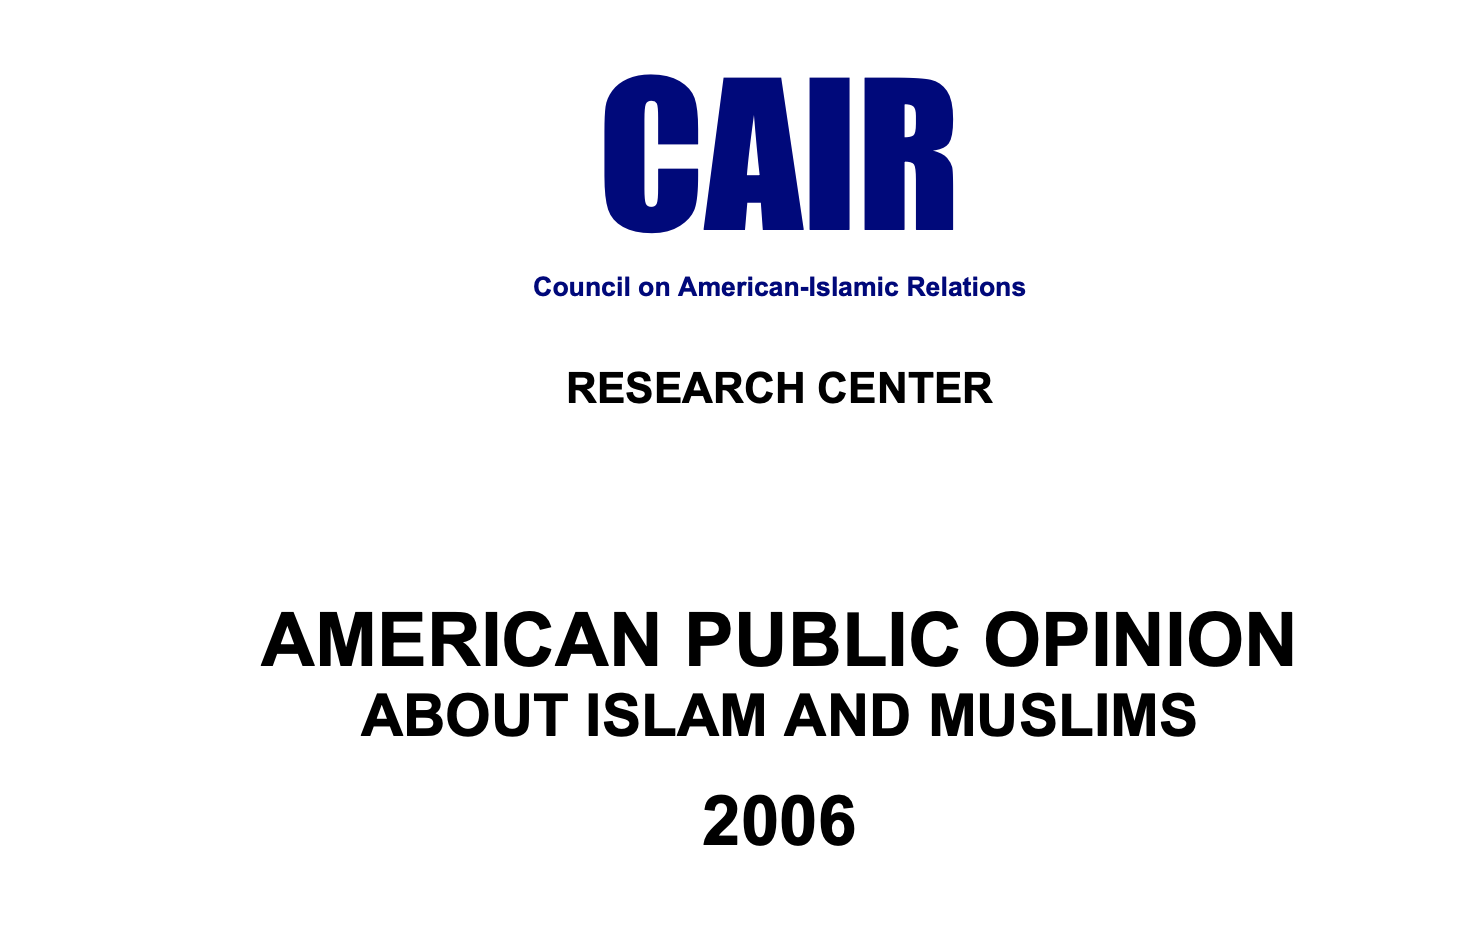 AMERICAN PUBLIC OPINION ABOUT ISLAM AND MUSLIMS 2006